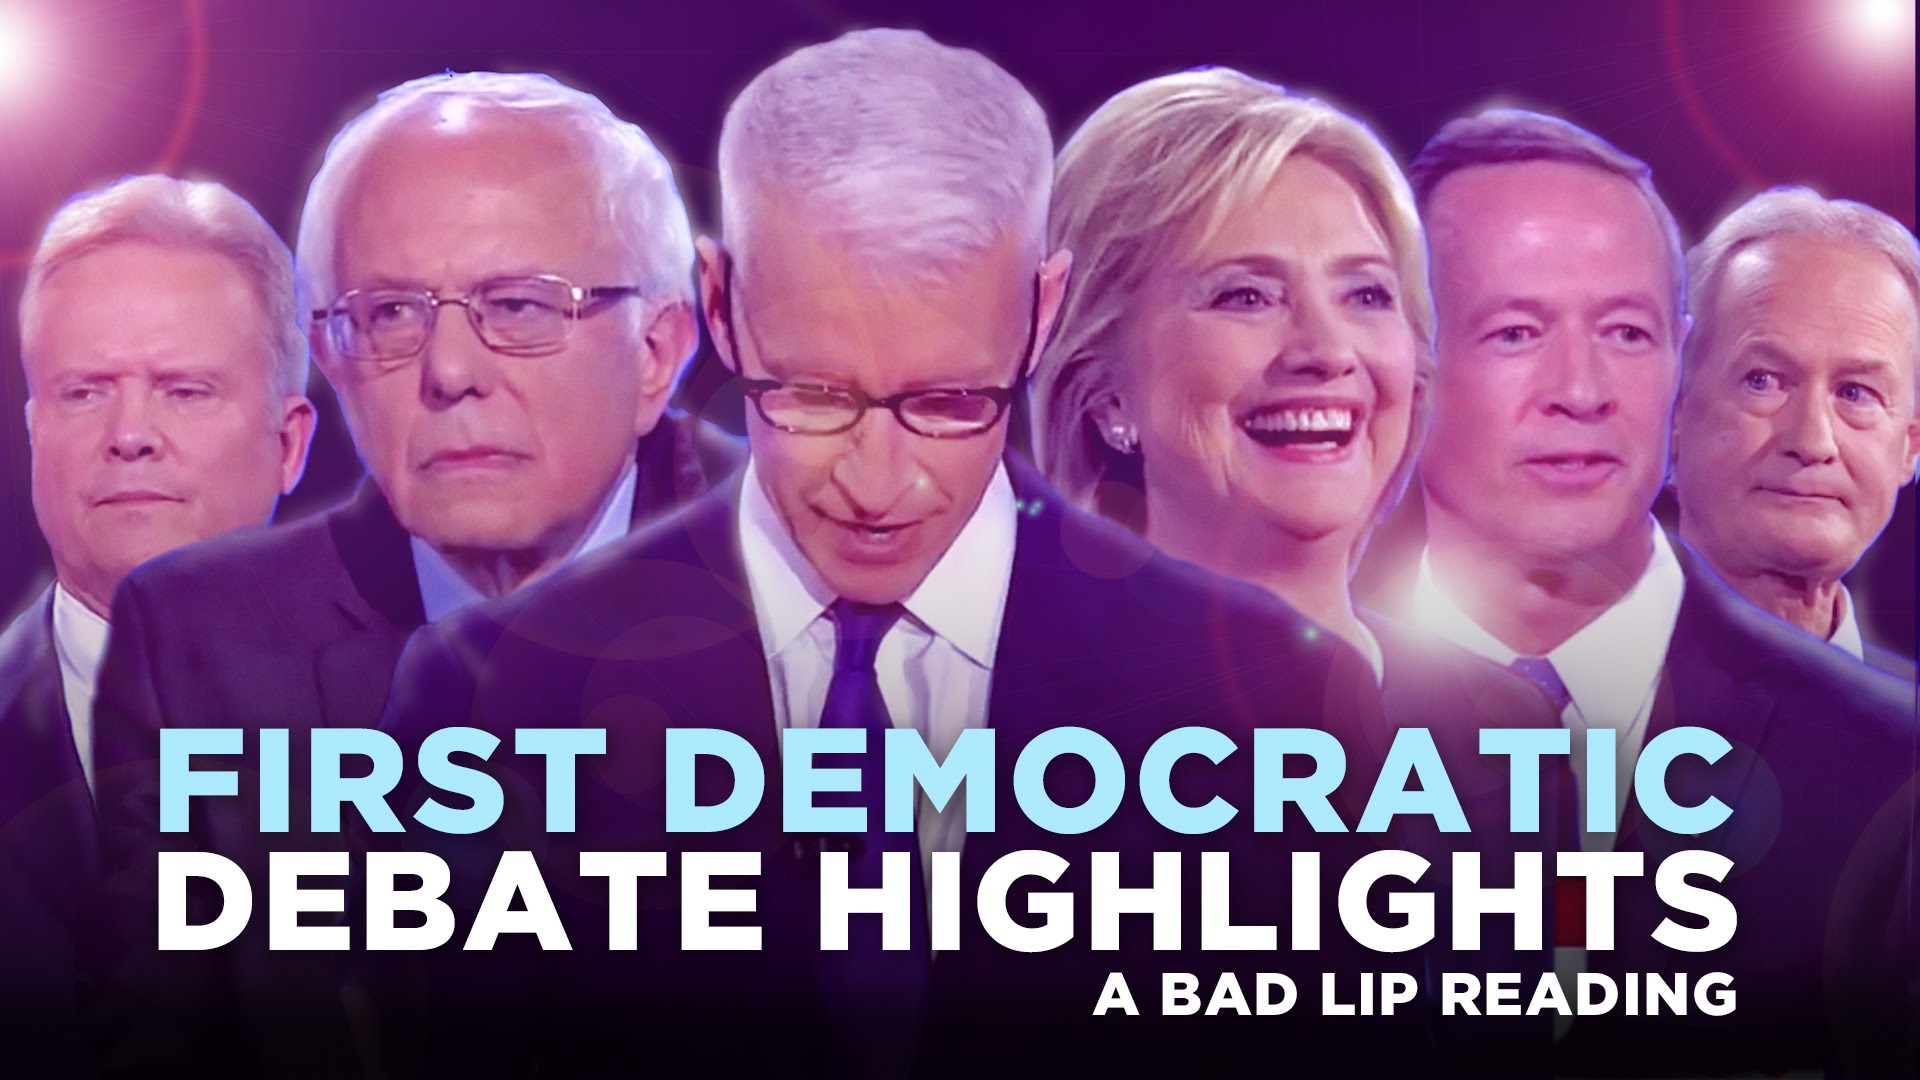 a bad lip reading of the first democratic debate